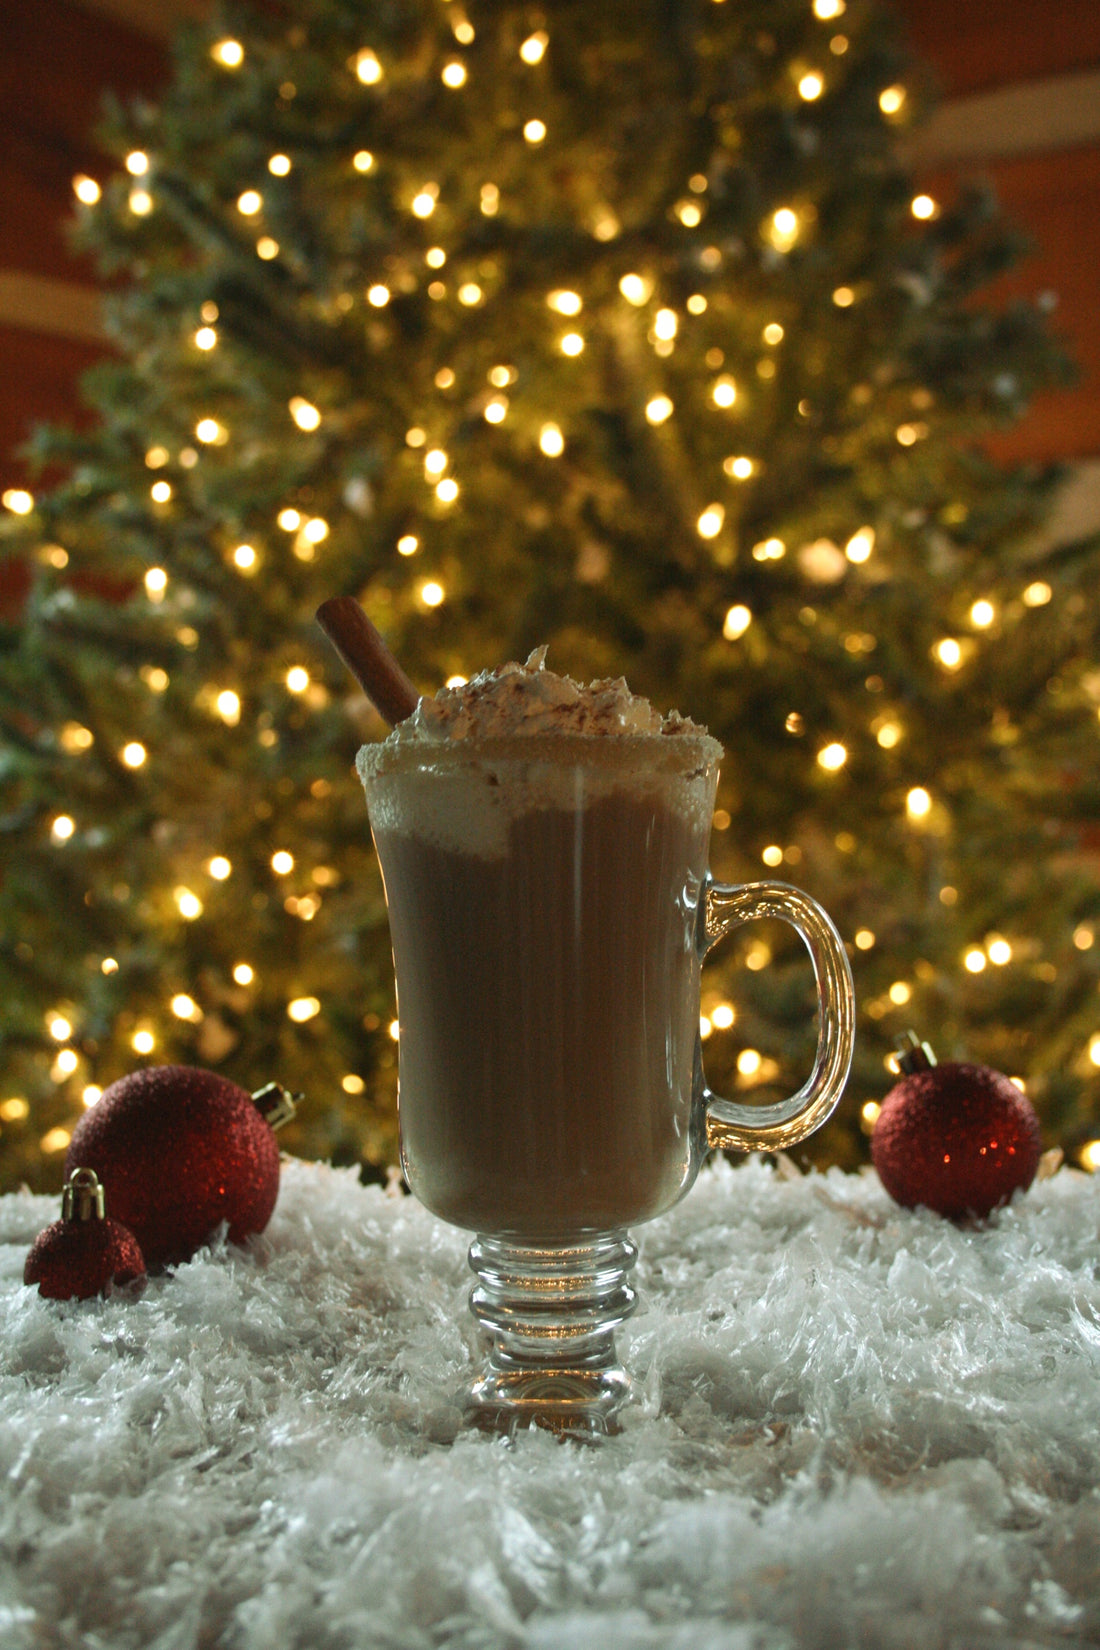 Maple syrup hot chocolate in from of a Christmas tree with white lights